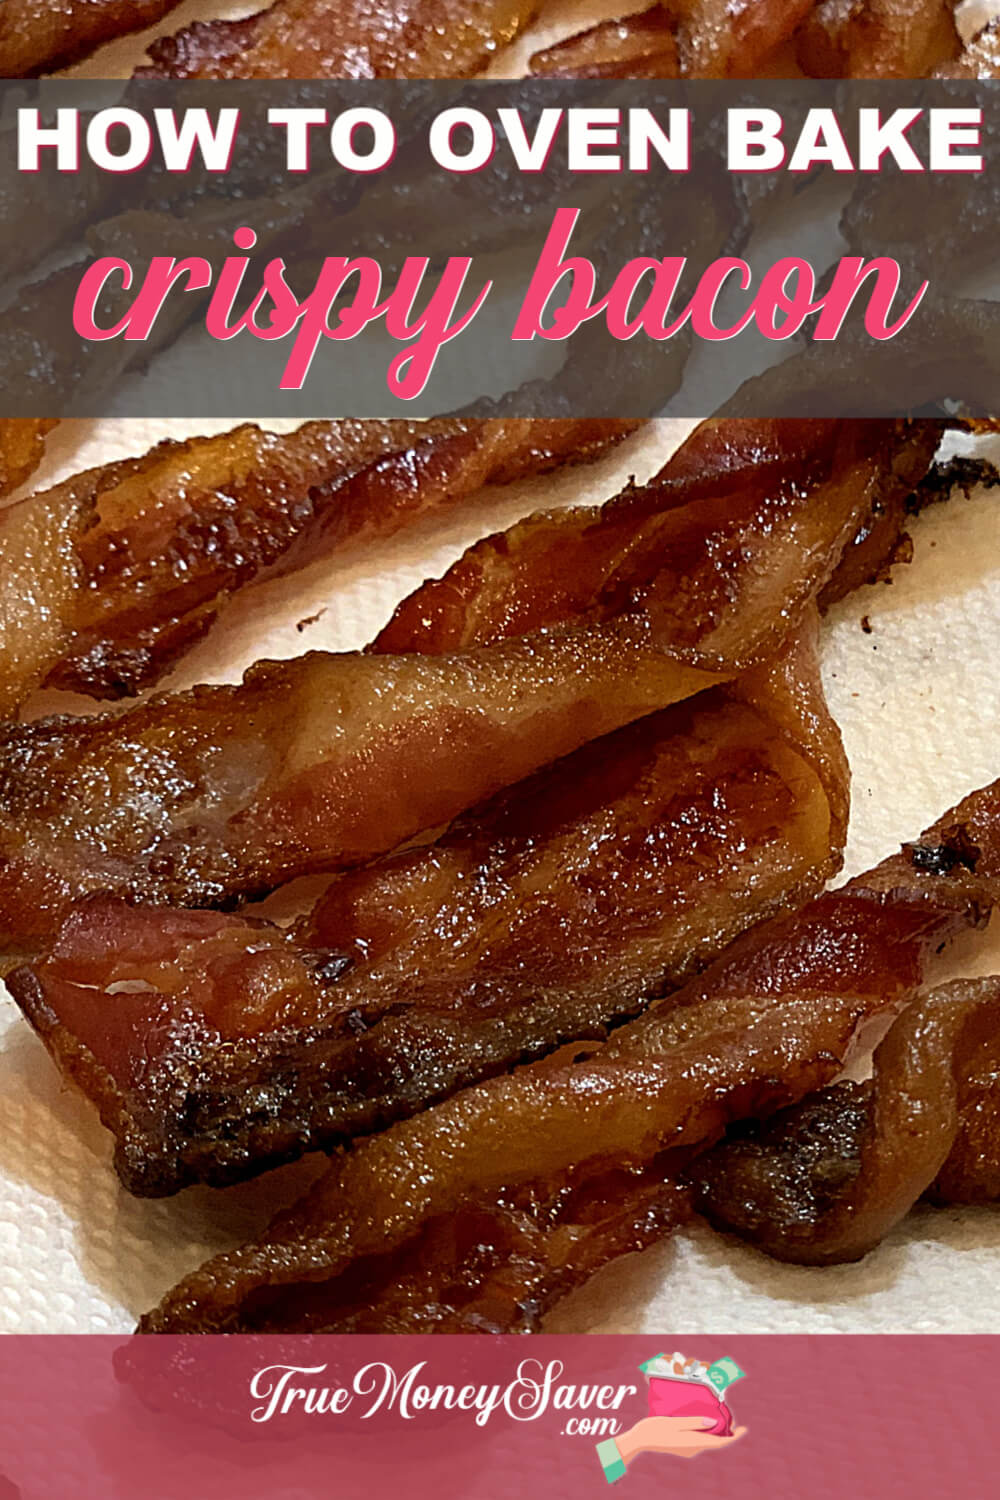 How To Bake Bacon In Oven For That Extra Crispiness You\'ll Love